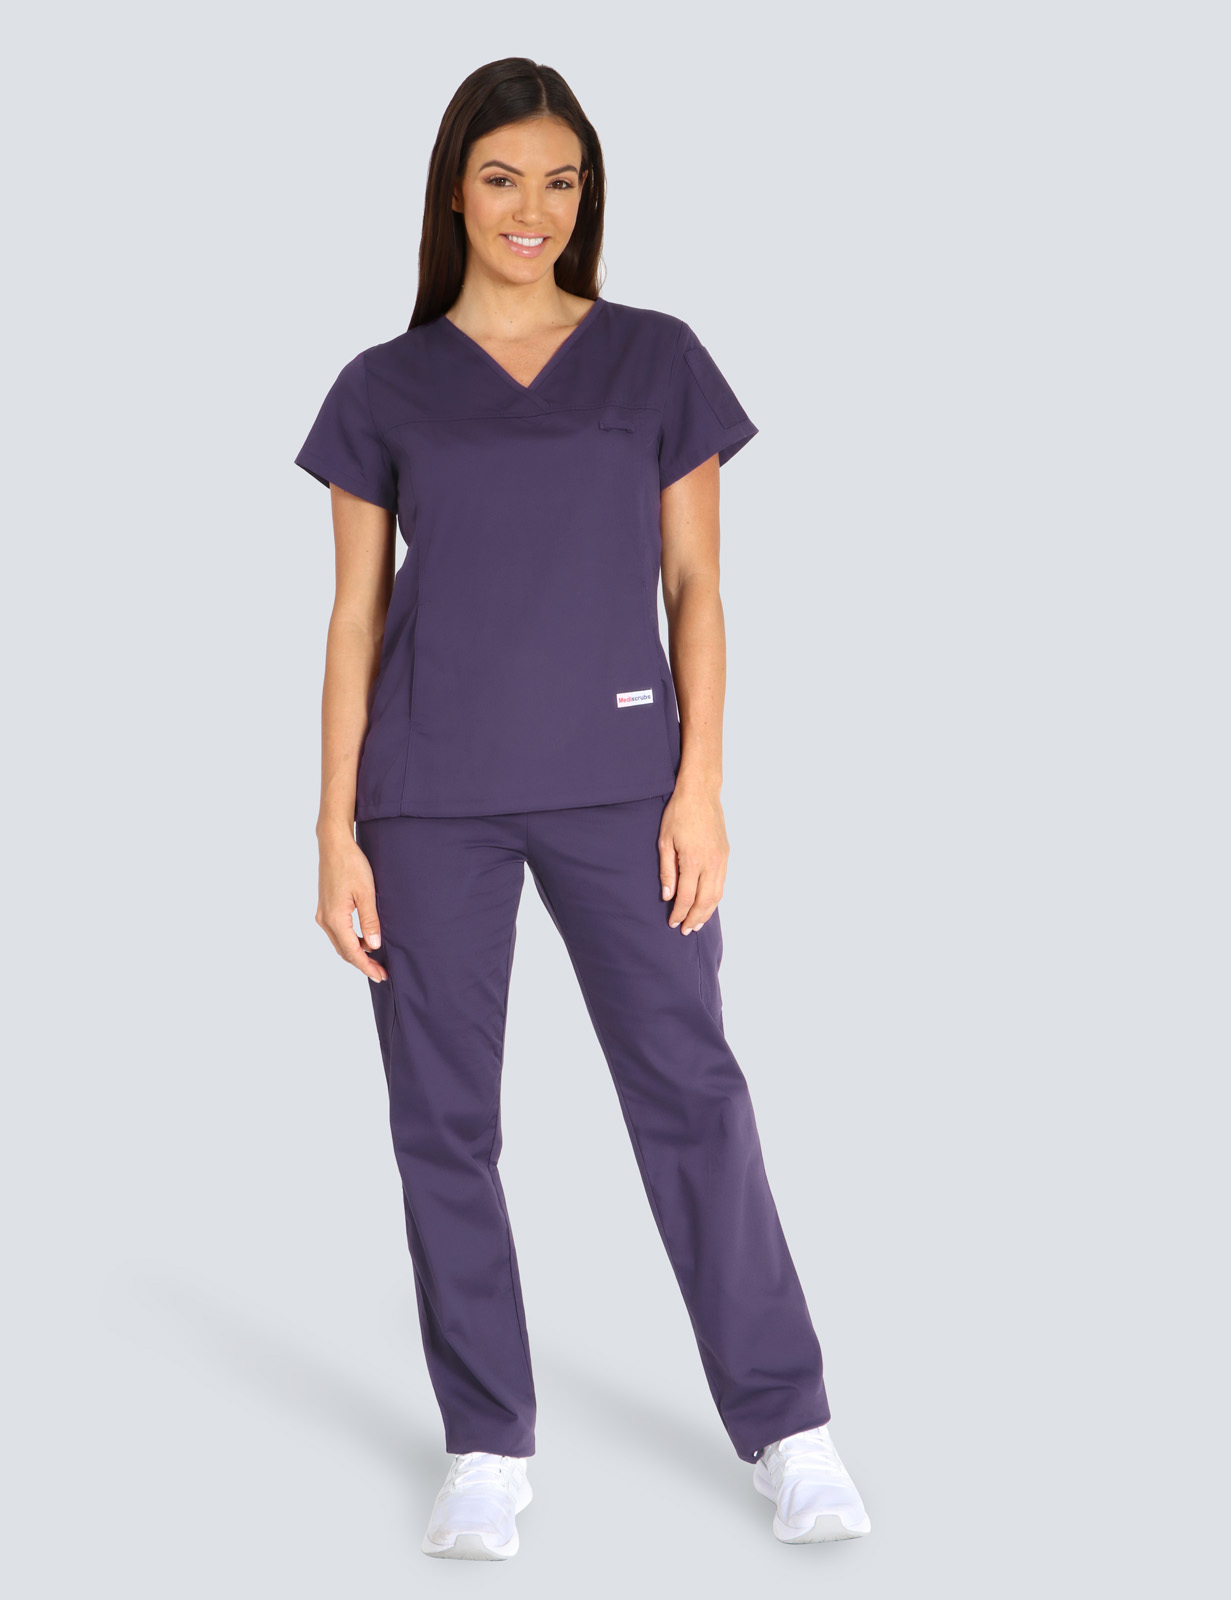 Caboolture Hospital - ED AIN (Women's Fit Solid Scrub Top and Cargo Pants in Aubergine incl Logos)